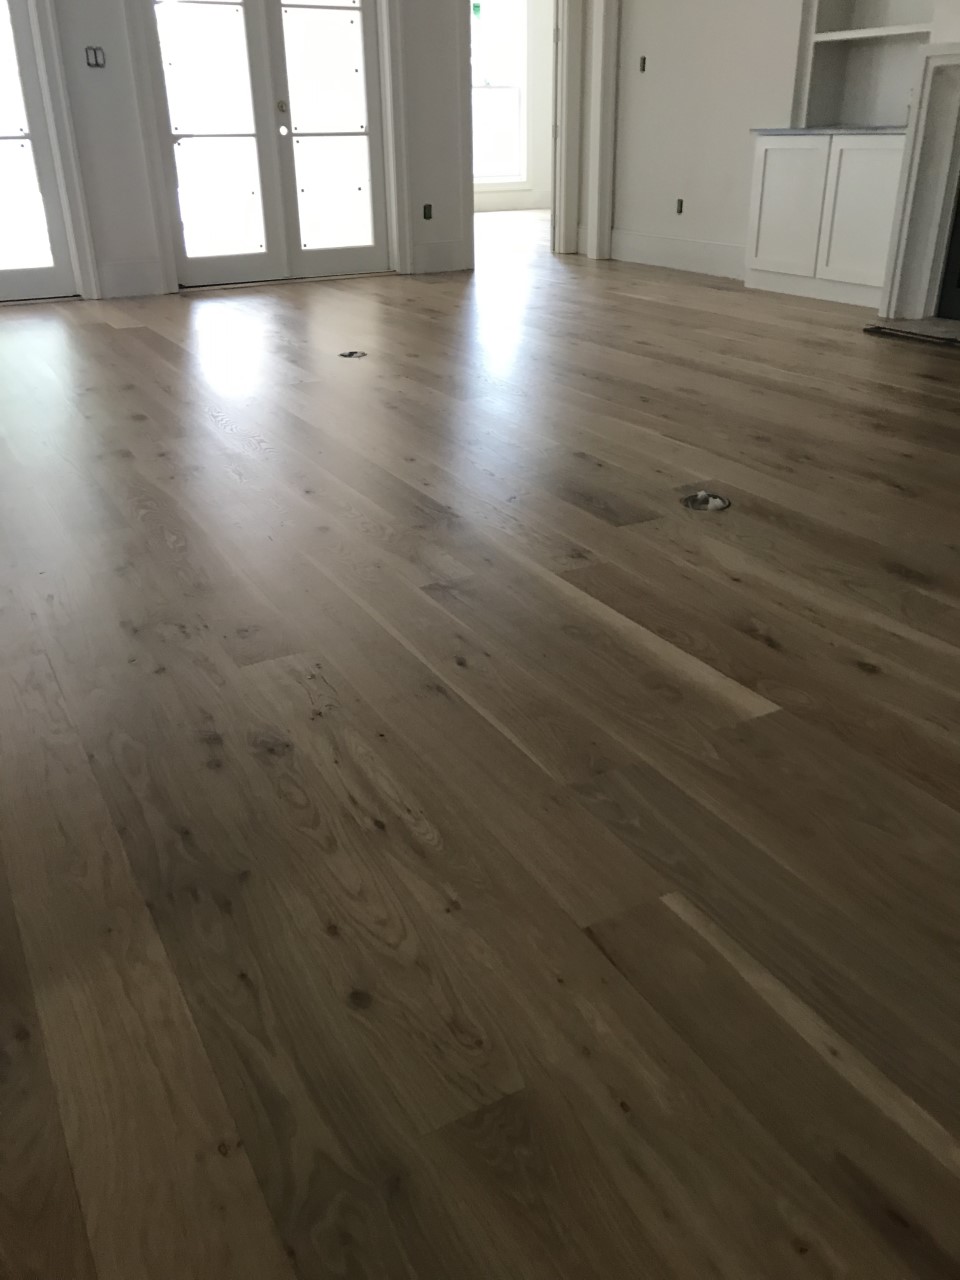 This is a photo of a living room with white oak flooring with a satin finish. It has a weather washed appearance.